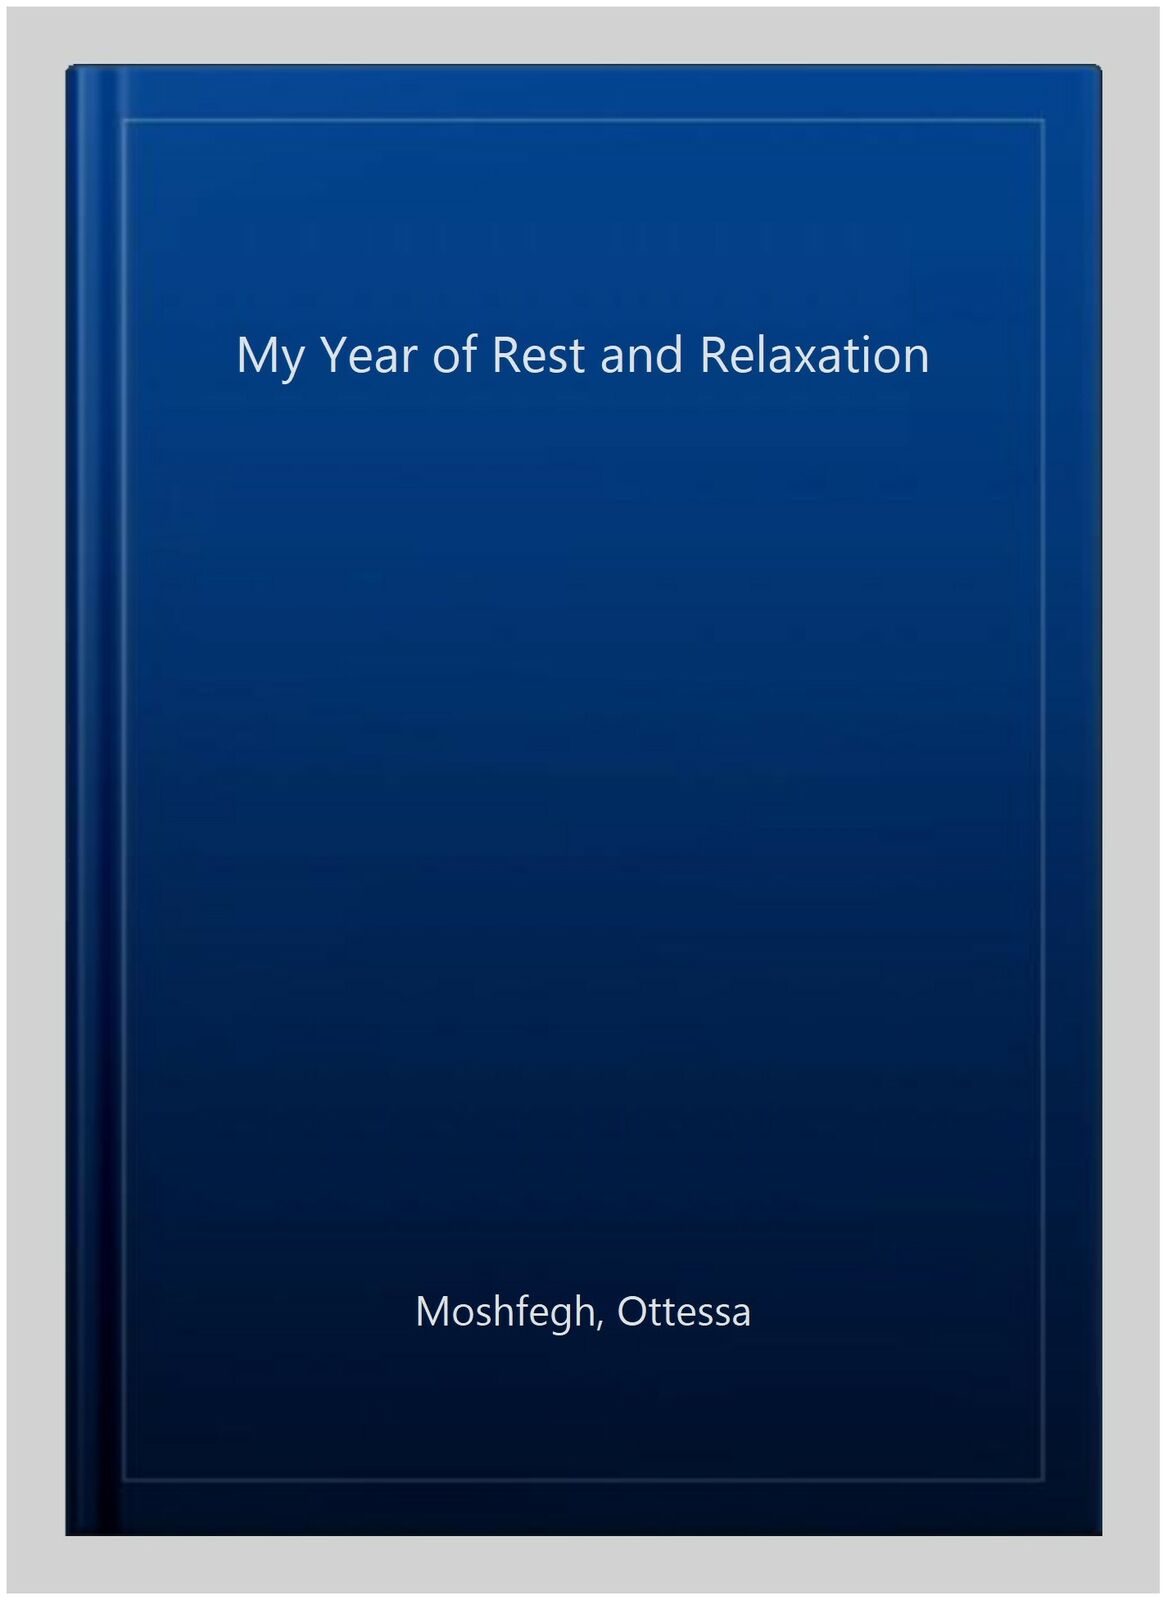 My Year of Rest and Relaxation Digital Print Ottessa Moshfegh